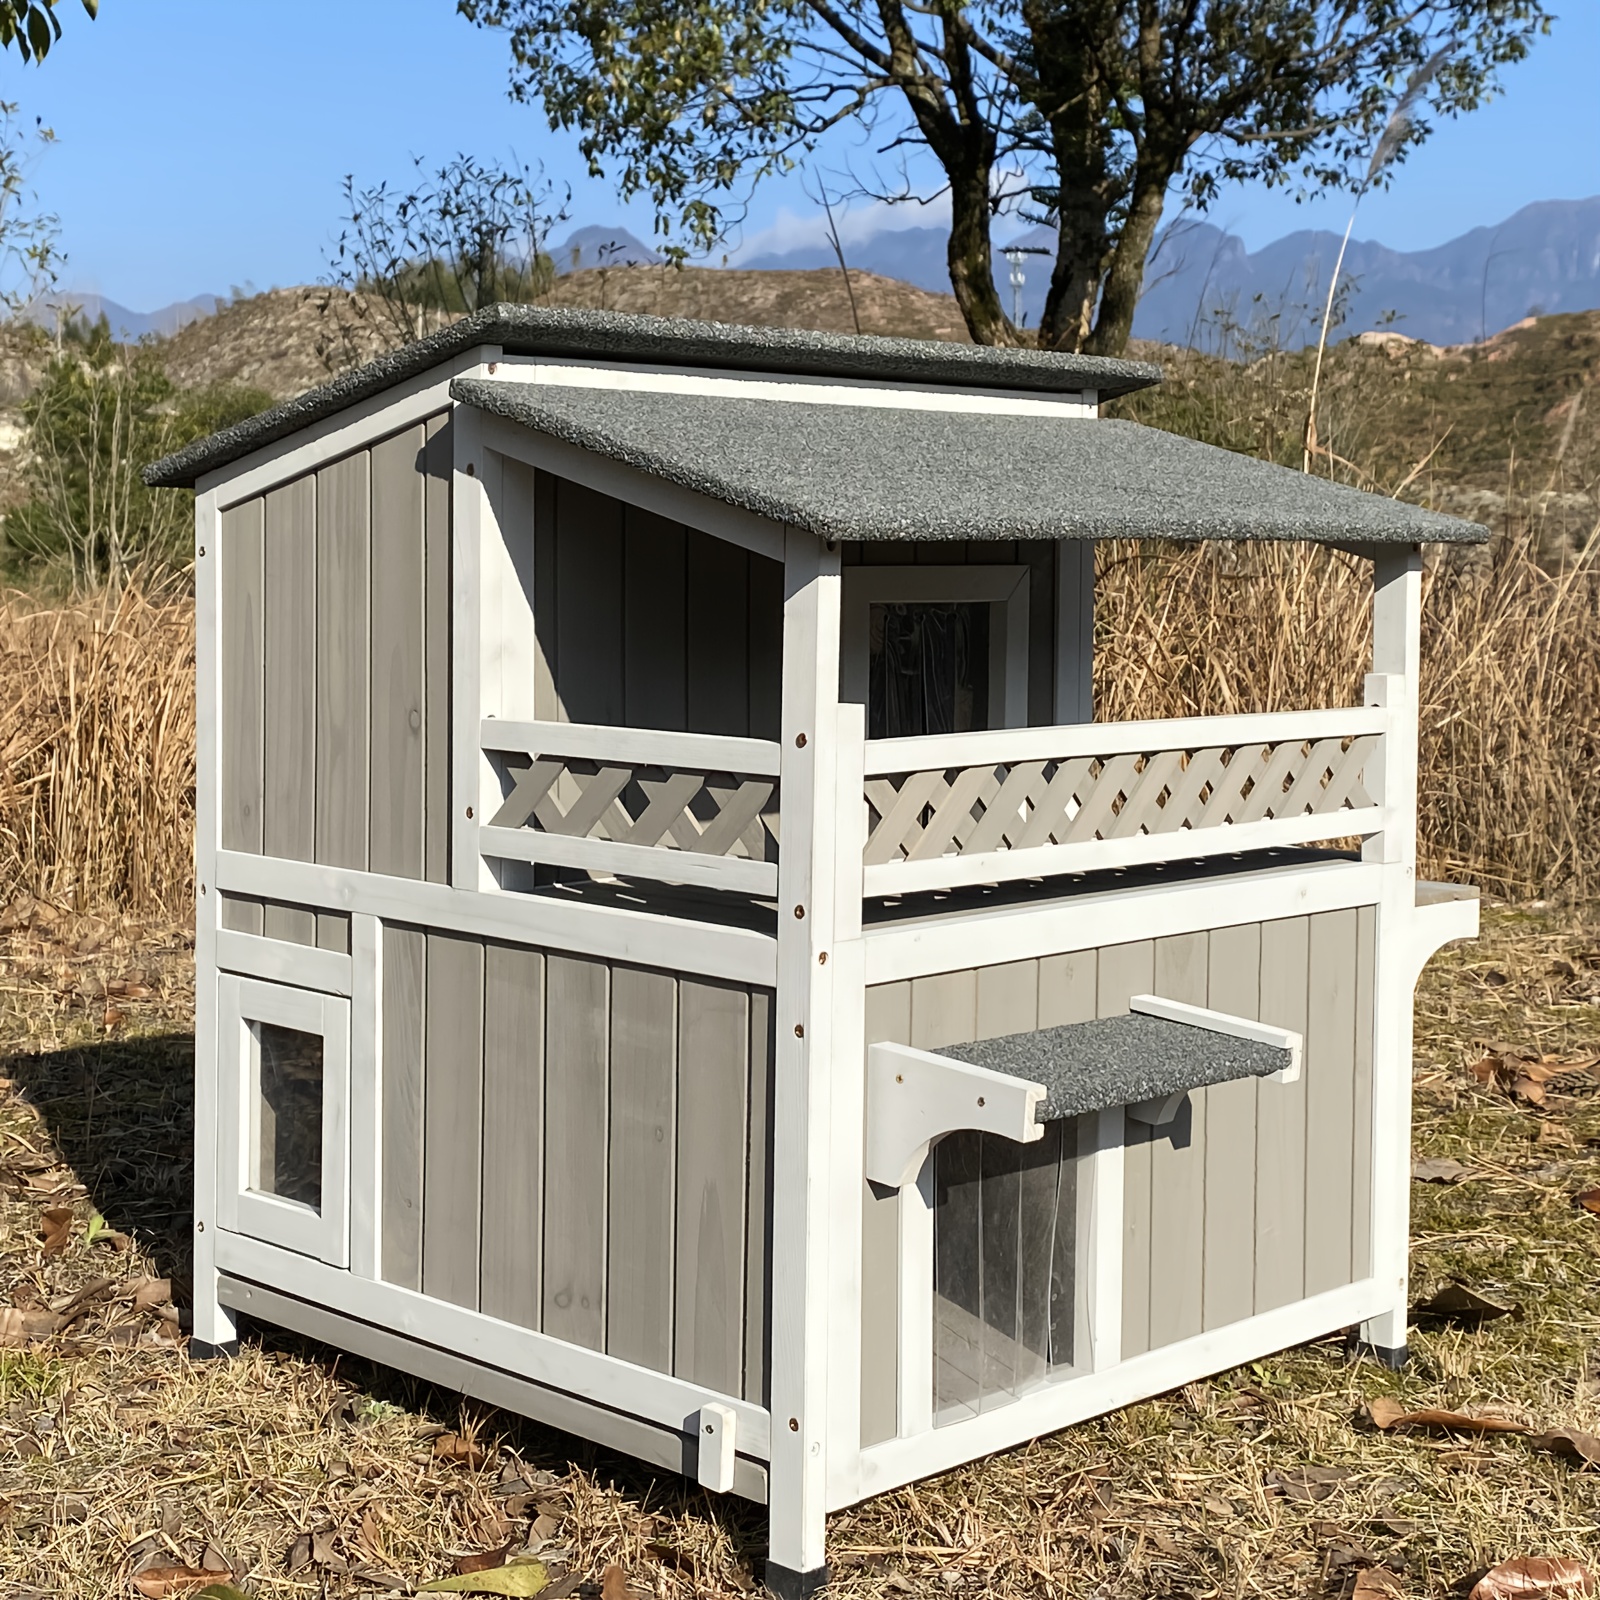 

Gowoodhut Feral Cat Shelter Outdoor Weatherproof - 2 Story Wooden Cat House Outside Feral Cat House With Balcony Waterproof, Escape Door